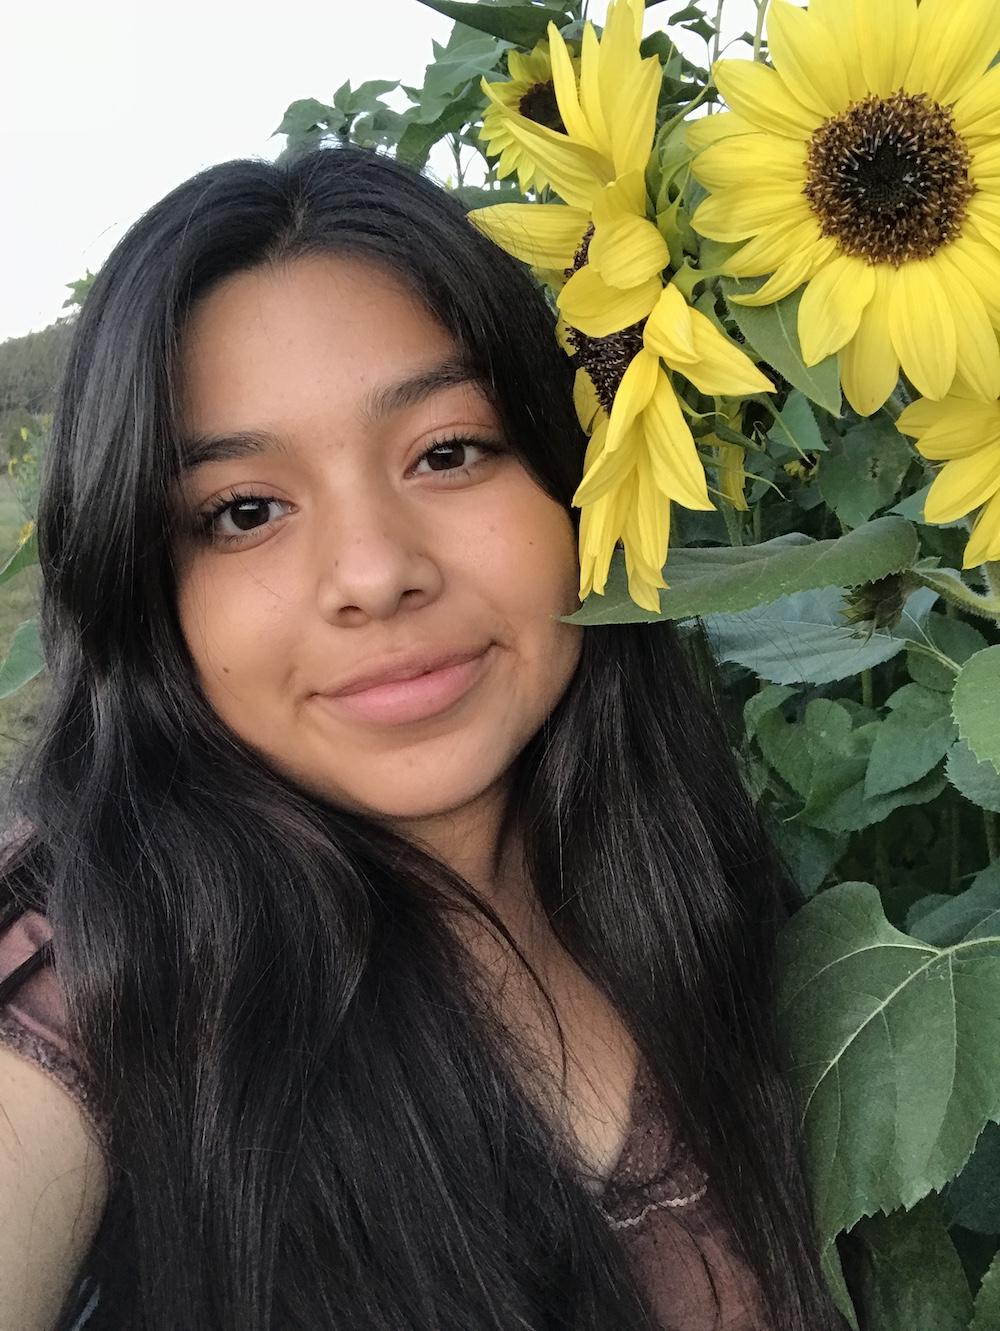 Hurtado poses in a sunflower field on Bear Mountain in Big Bear, CA, in September 2018. Hurtado said as she grew more confident in her writing abilities, she enjoyed taking photos and attending events for yearbook.